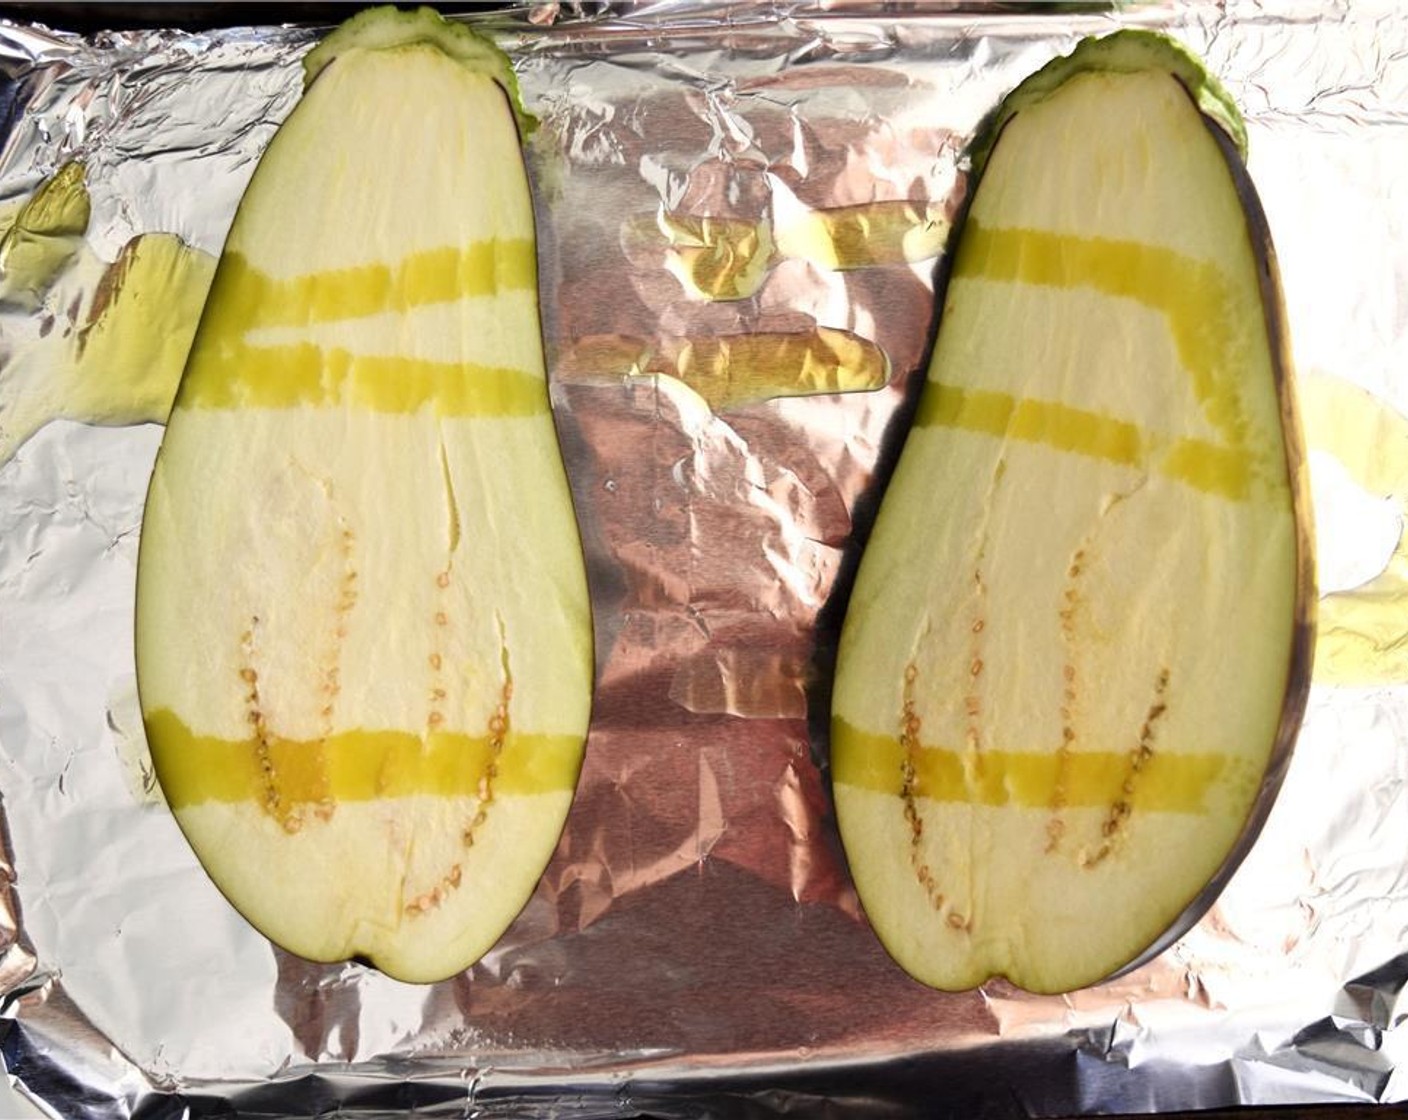 step 1 Preheat oven to 400 degrees F (200 degrees C). Halve the Eggplants (2), rub with Olive Oil (2 Tbsp) and place face down on sheet pan. Bake for 15 minutes or until eggplant is fully cooked. Set aside and let cool.